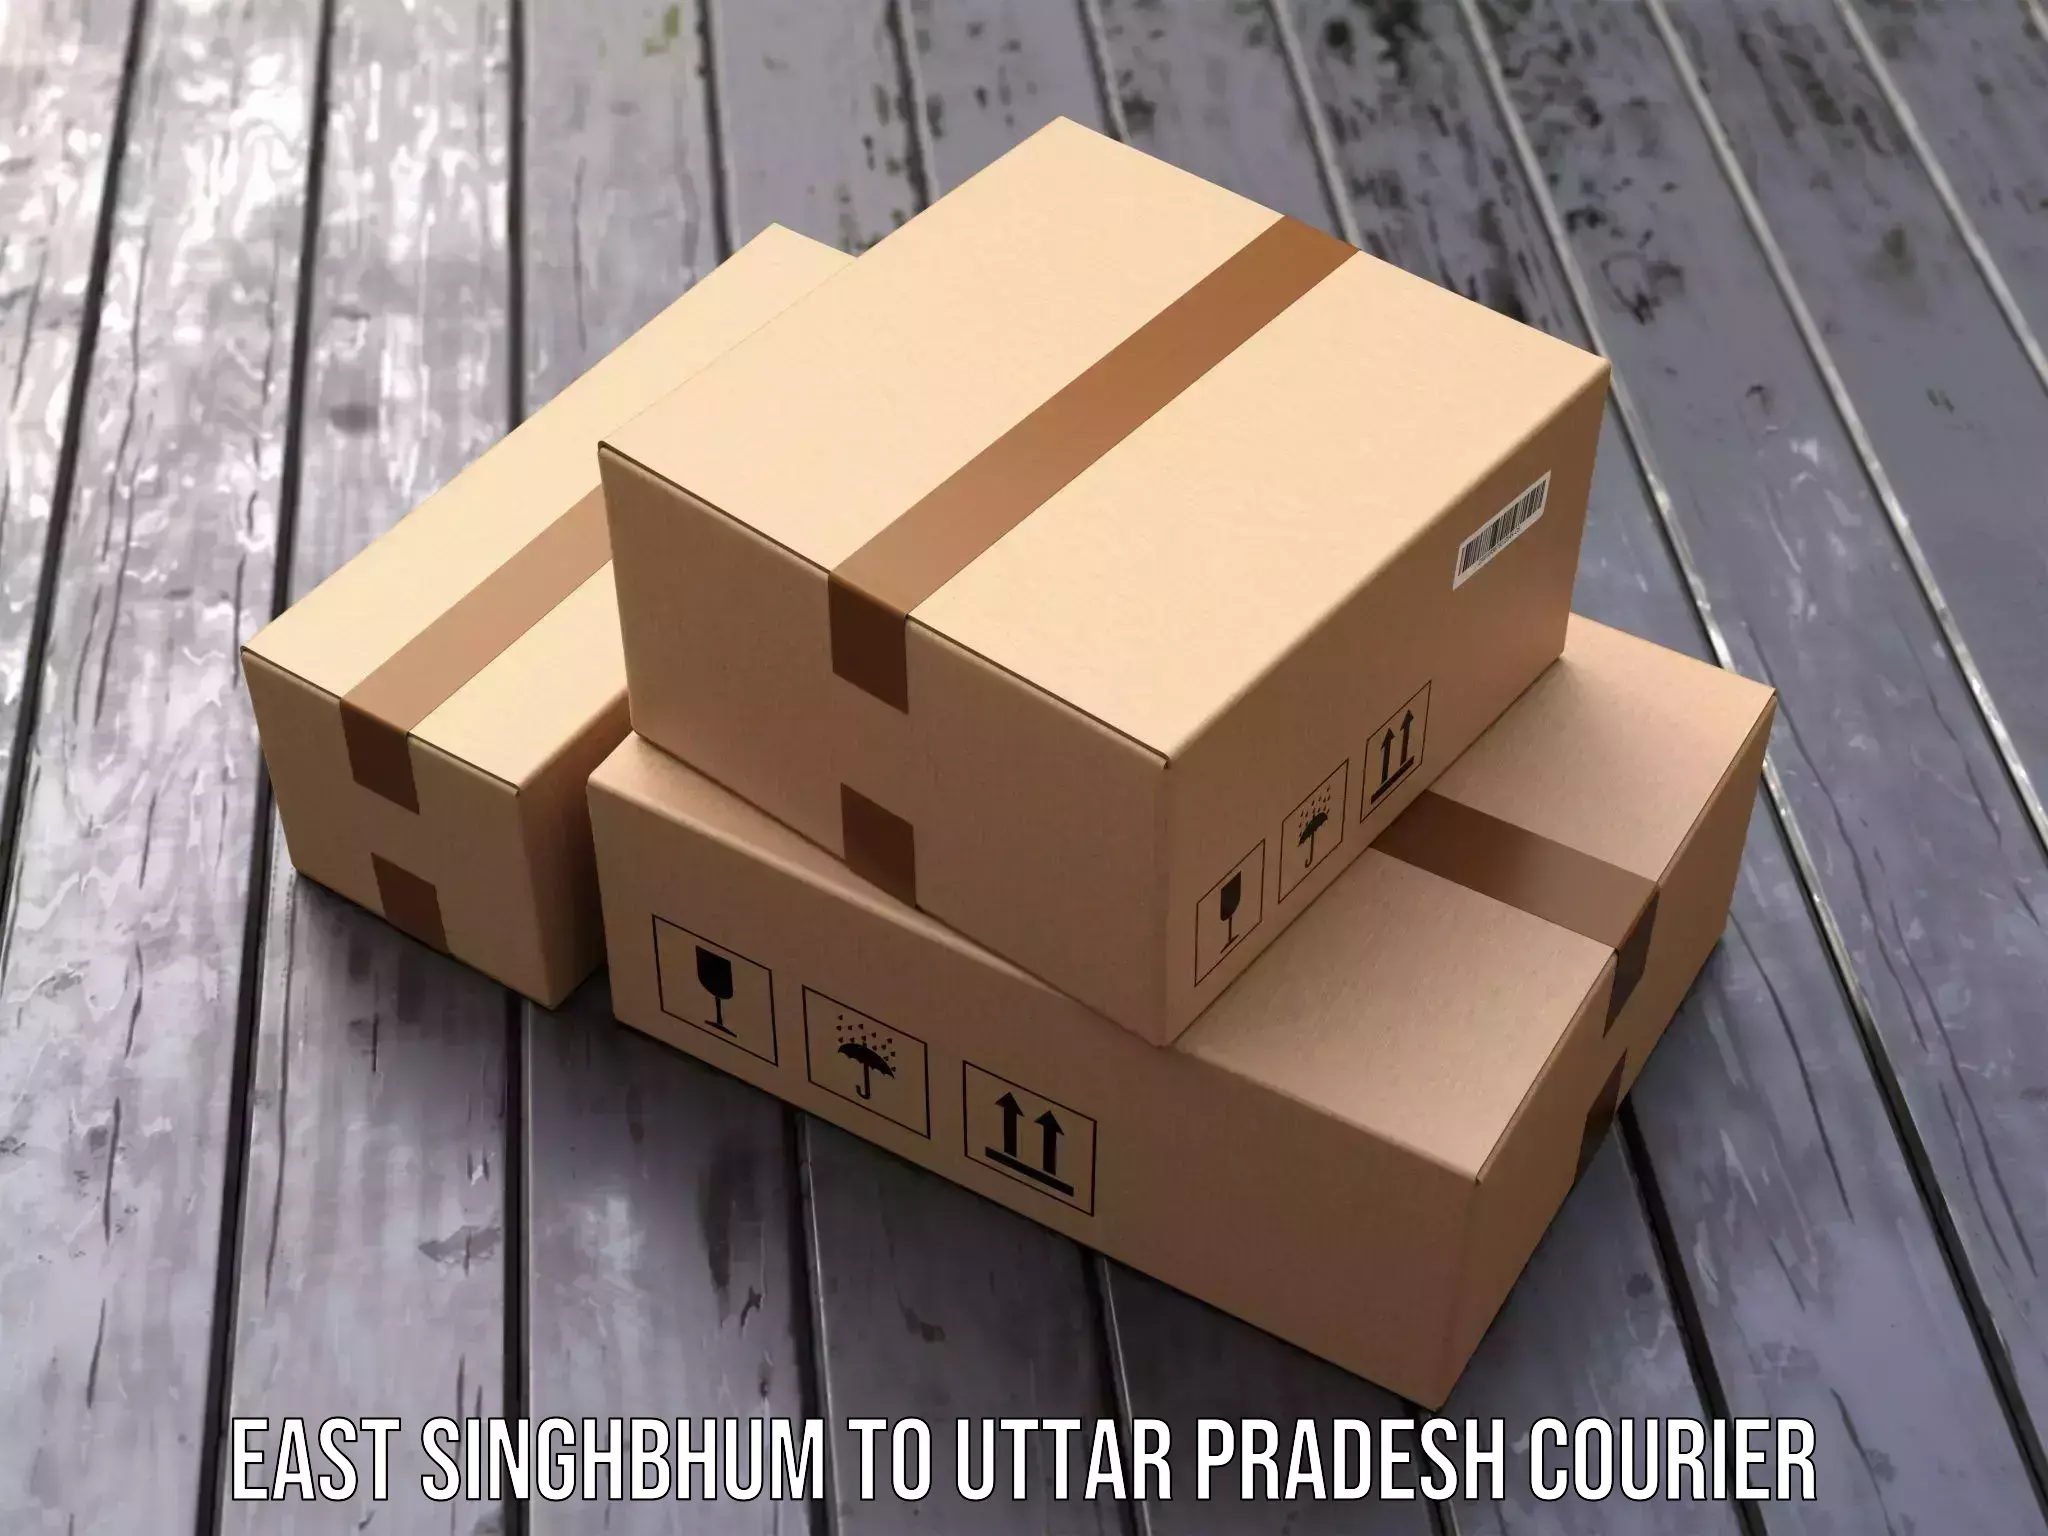 Professional courier services in East Singhbhum to Madhoganj